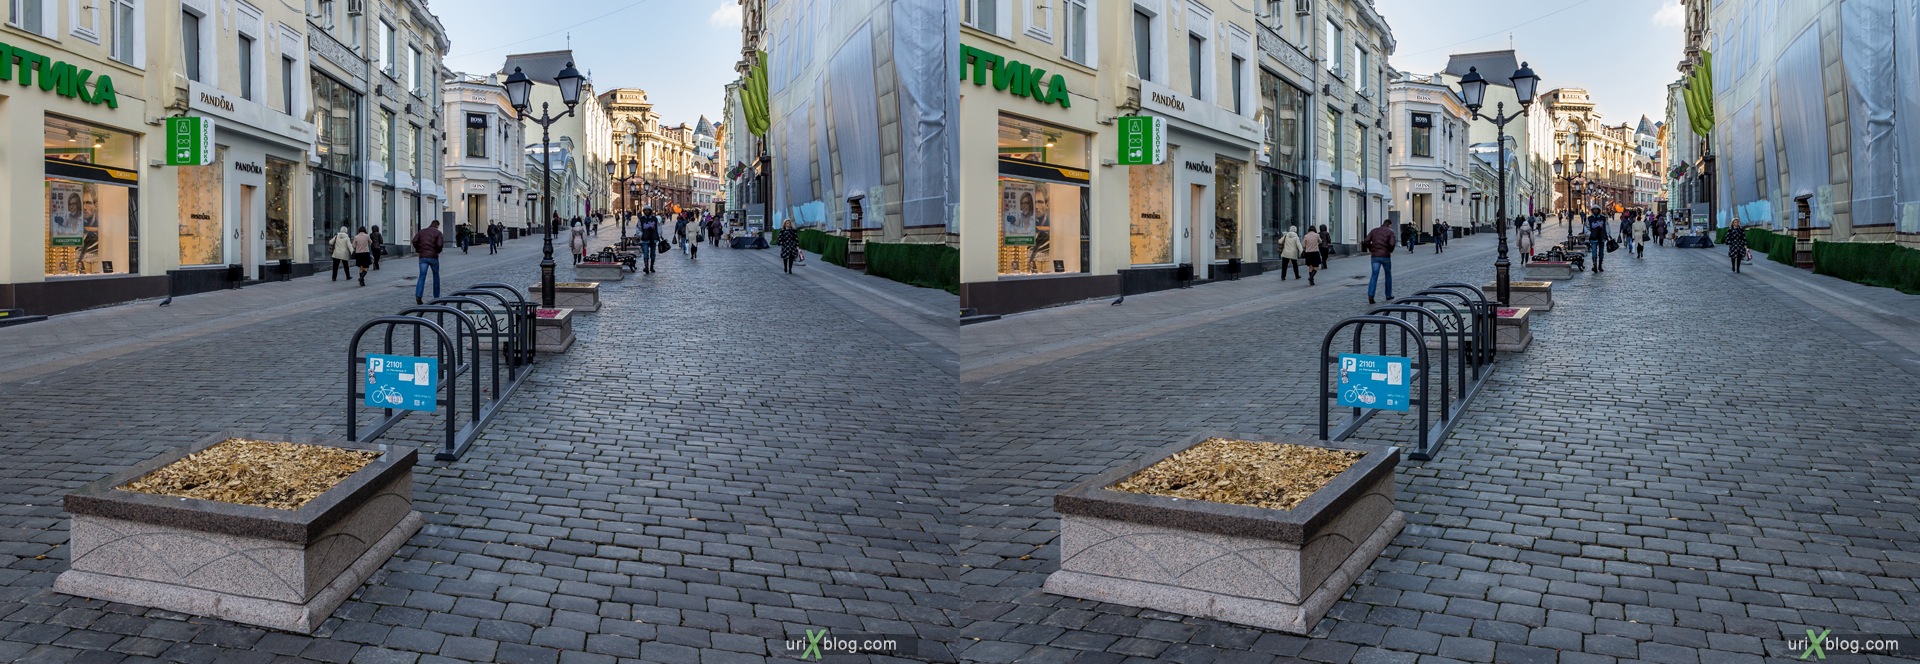 2013, Moscow, Russia, Kuznetsky most, street, new pedestrian zone, 3D, stereo pair, cross-eyed, crossview, cross view stereo pair, stereoscopic